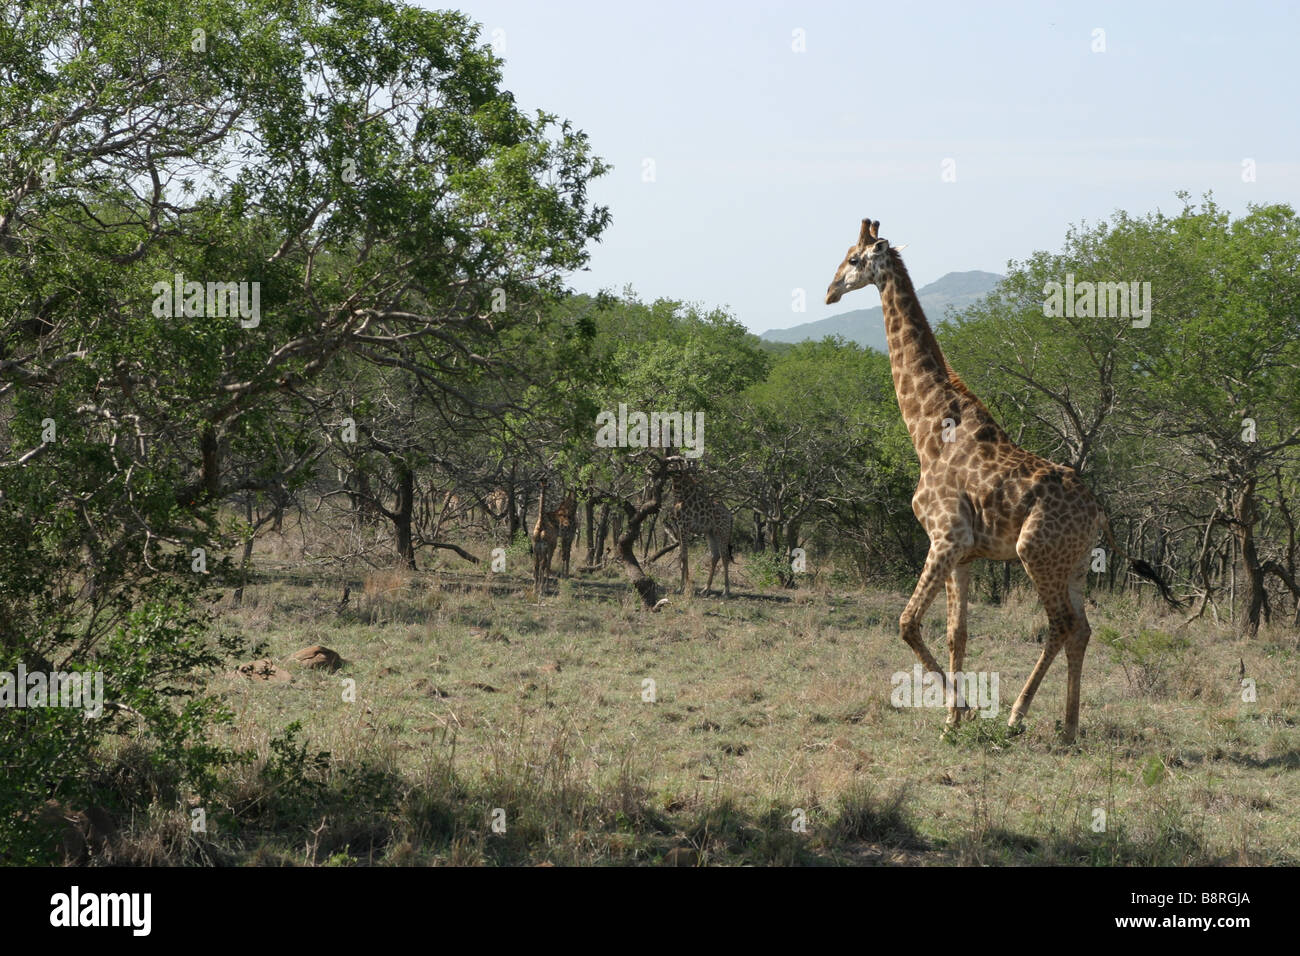 Picture of a giraffe in the wildlife Stock Photo